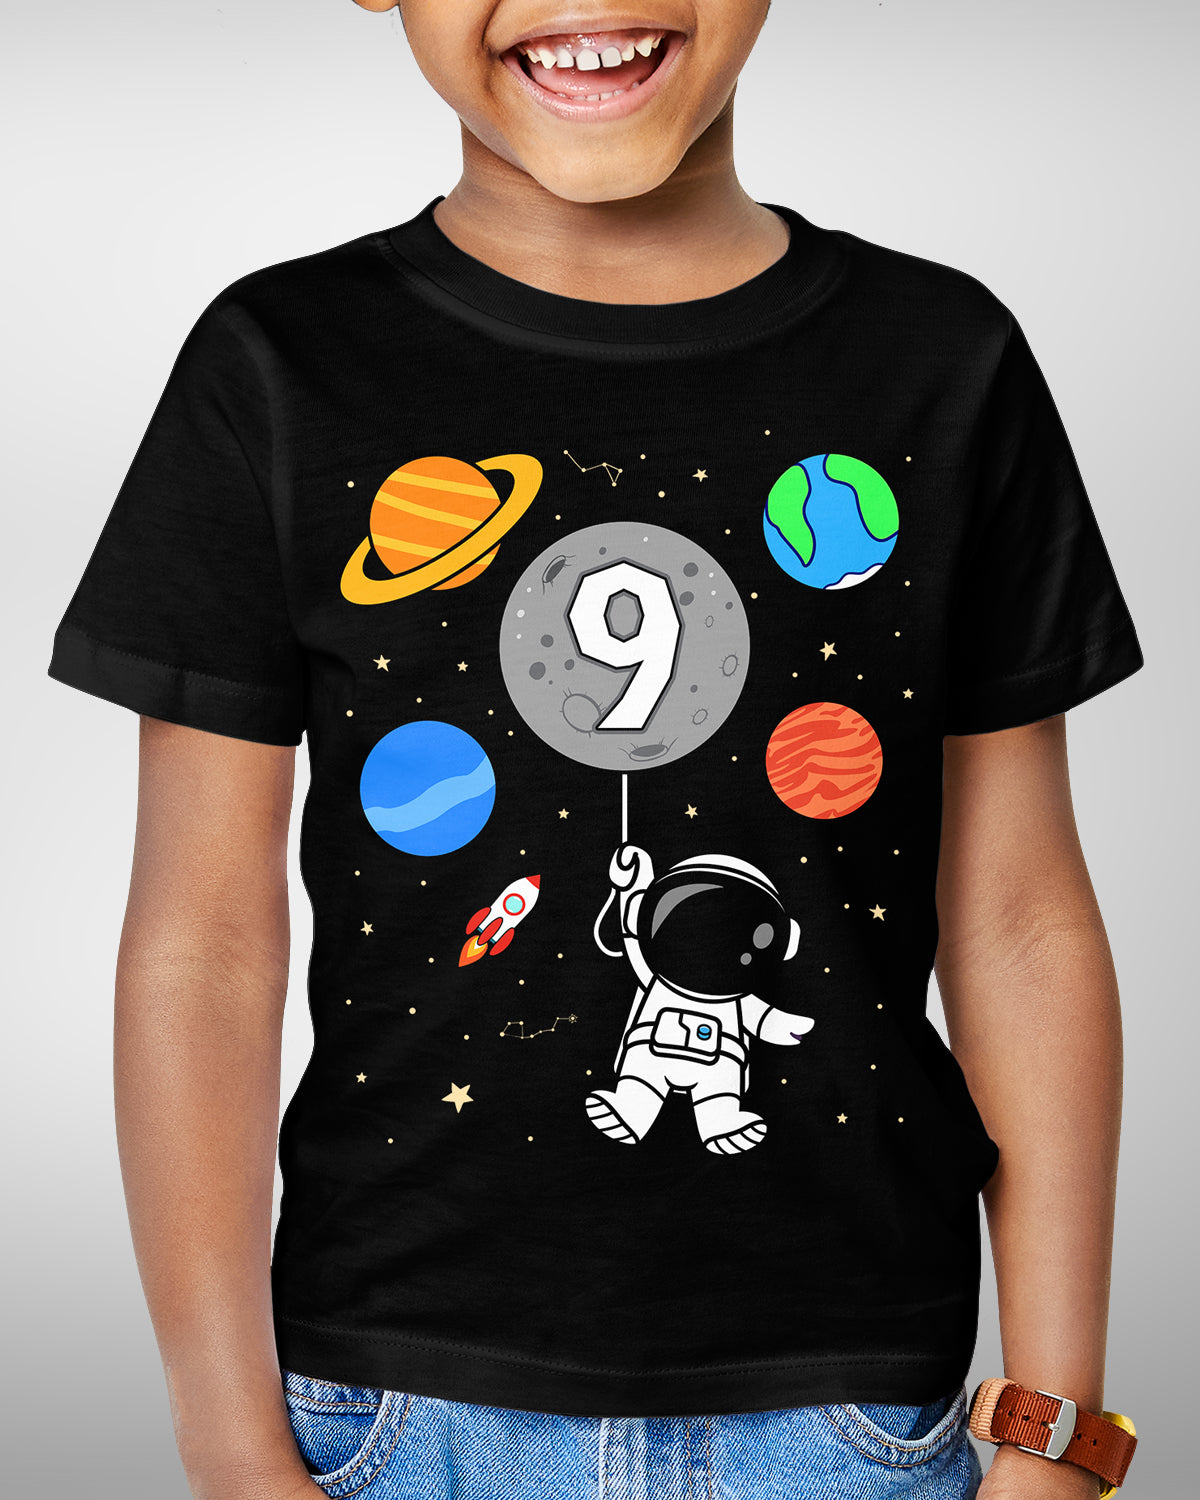 9th Birthday Shirt - Astronaut Outer Space - 9th Birthday Gift